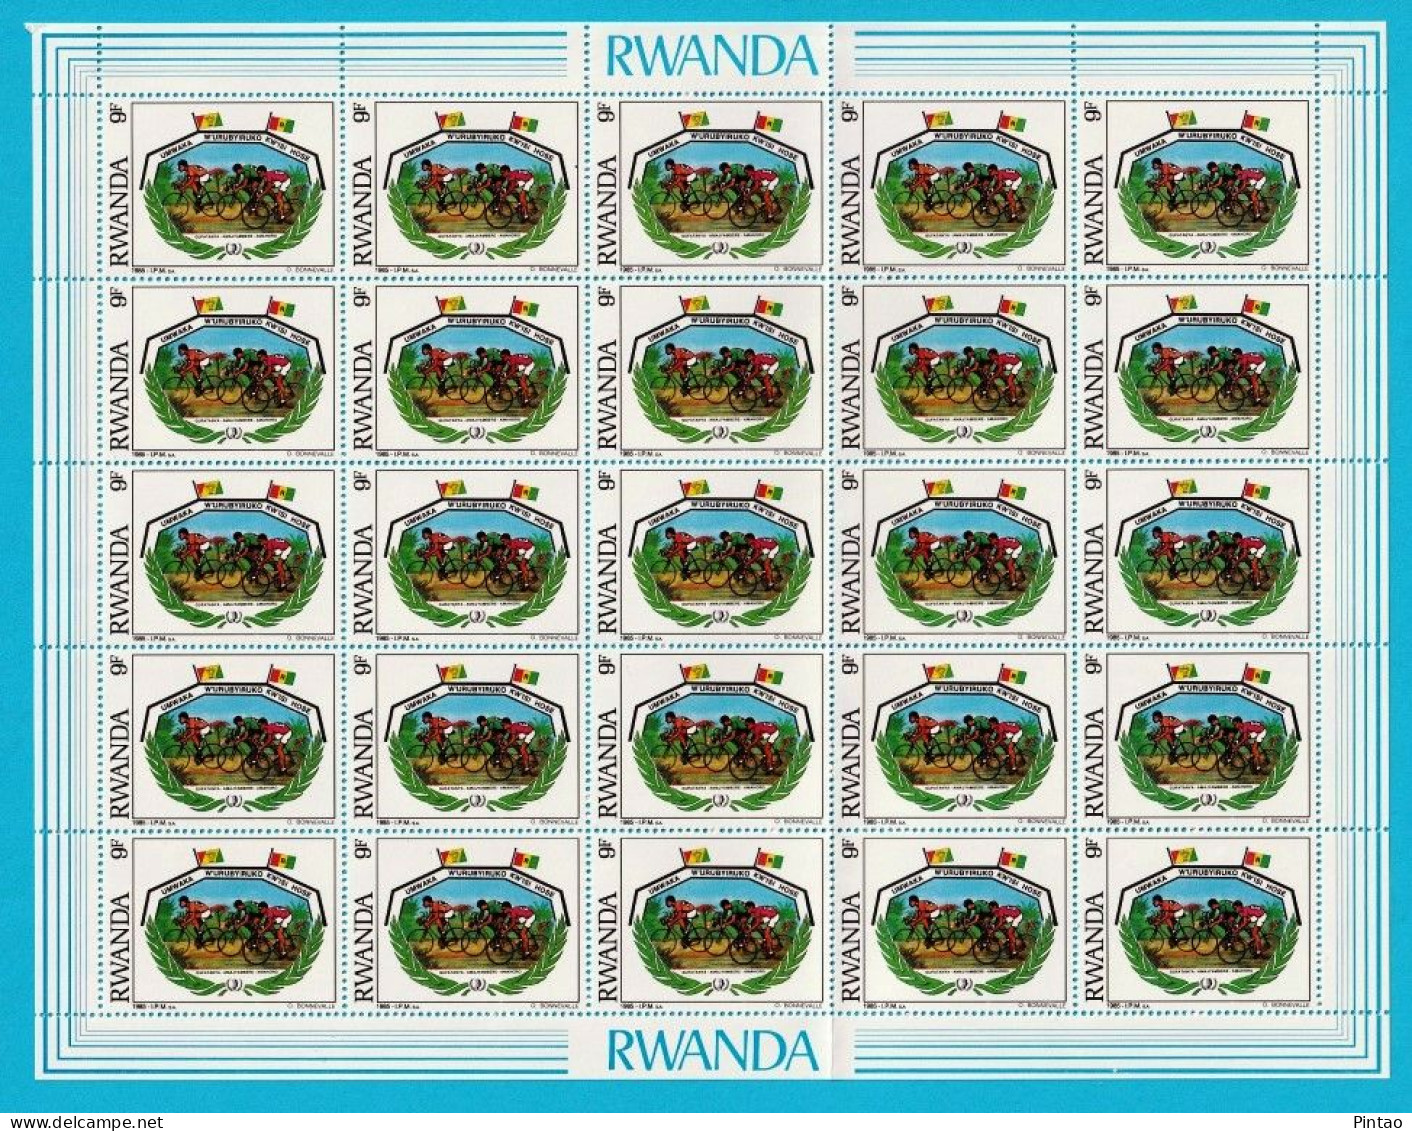 WW6972f- RUANDA 1985- MNH_ 4 FOLDED SHEETS / 25 ISSUES  /  100 STAMPS - Nuevos